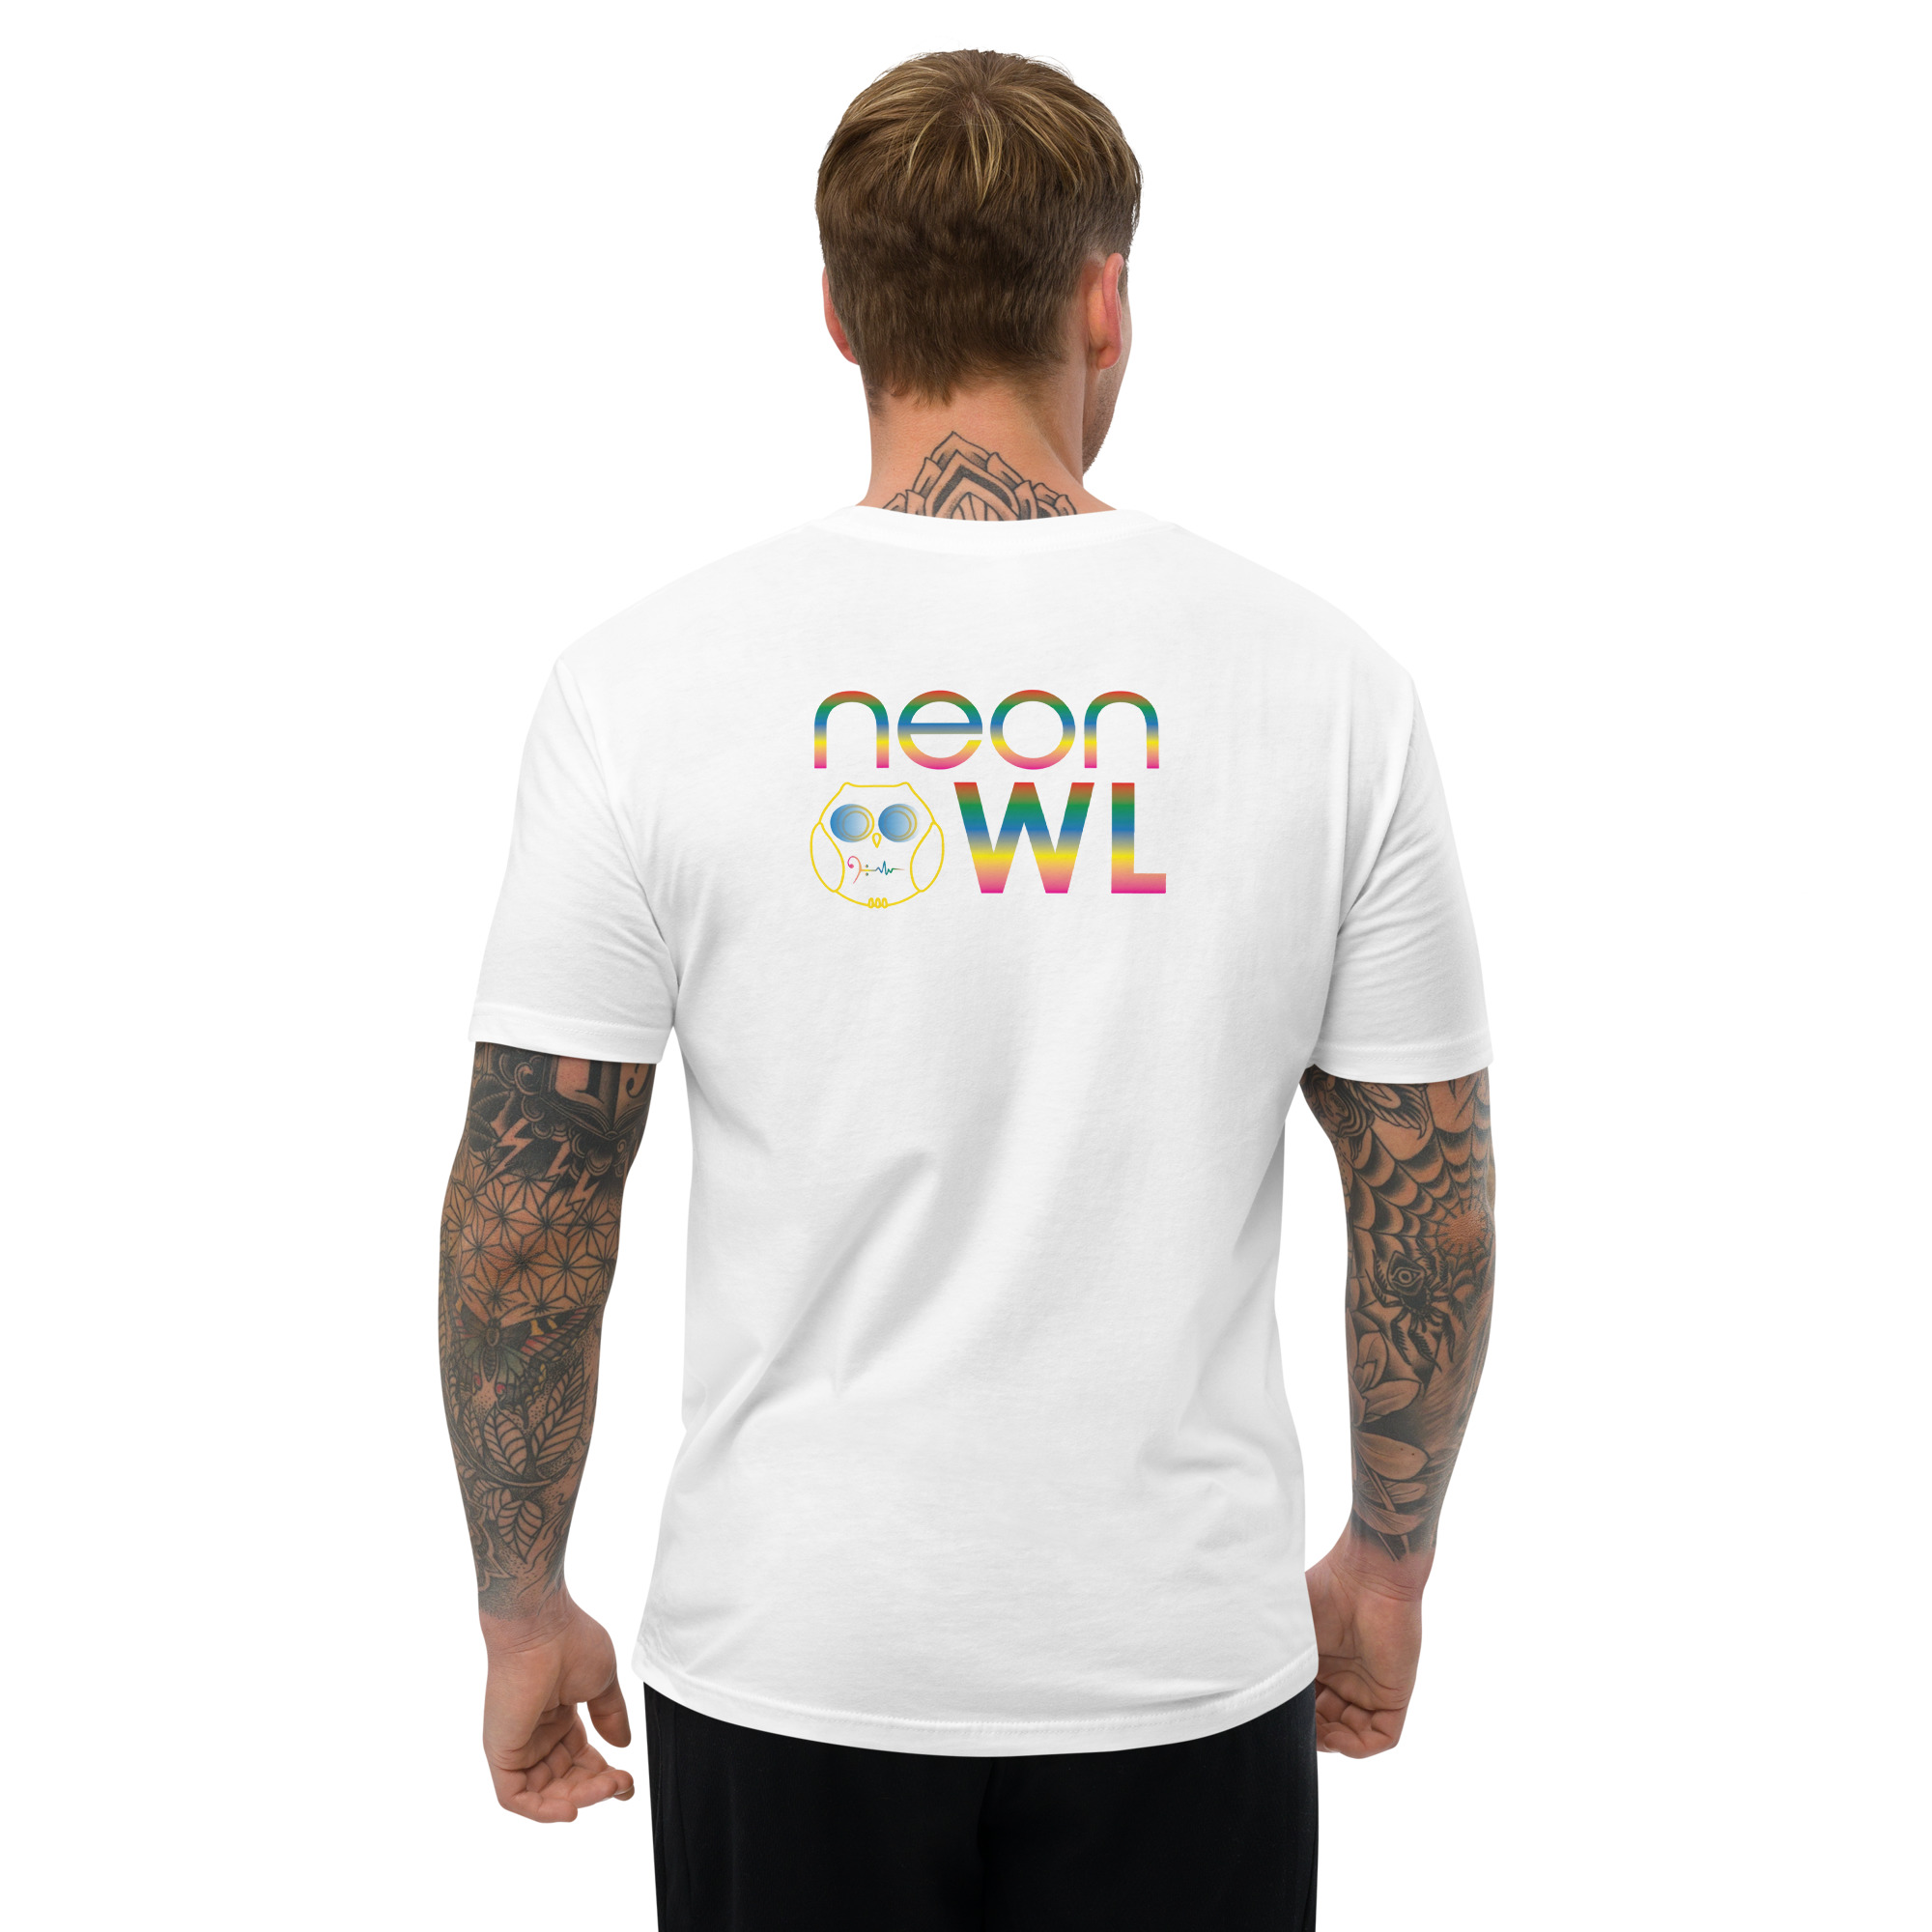 Neon Owl x Groove Cruise Unisex T-Shirt 2-Sided Print (White)